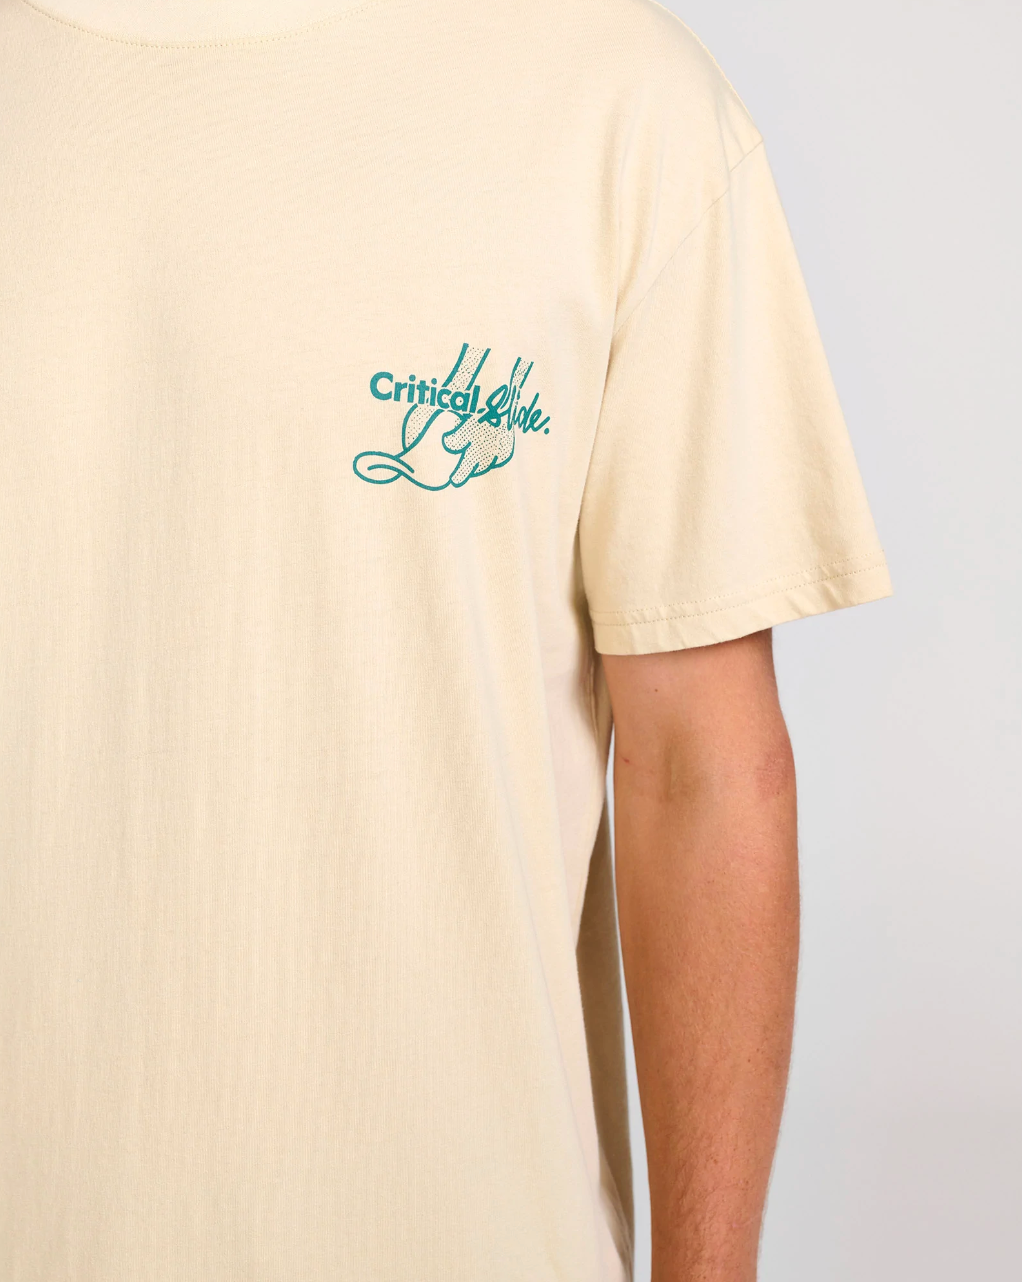 TCSS Duck Dive Tee Sand